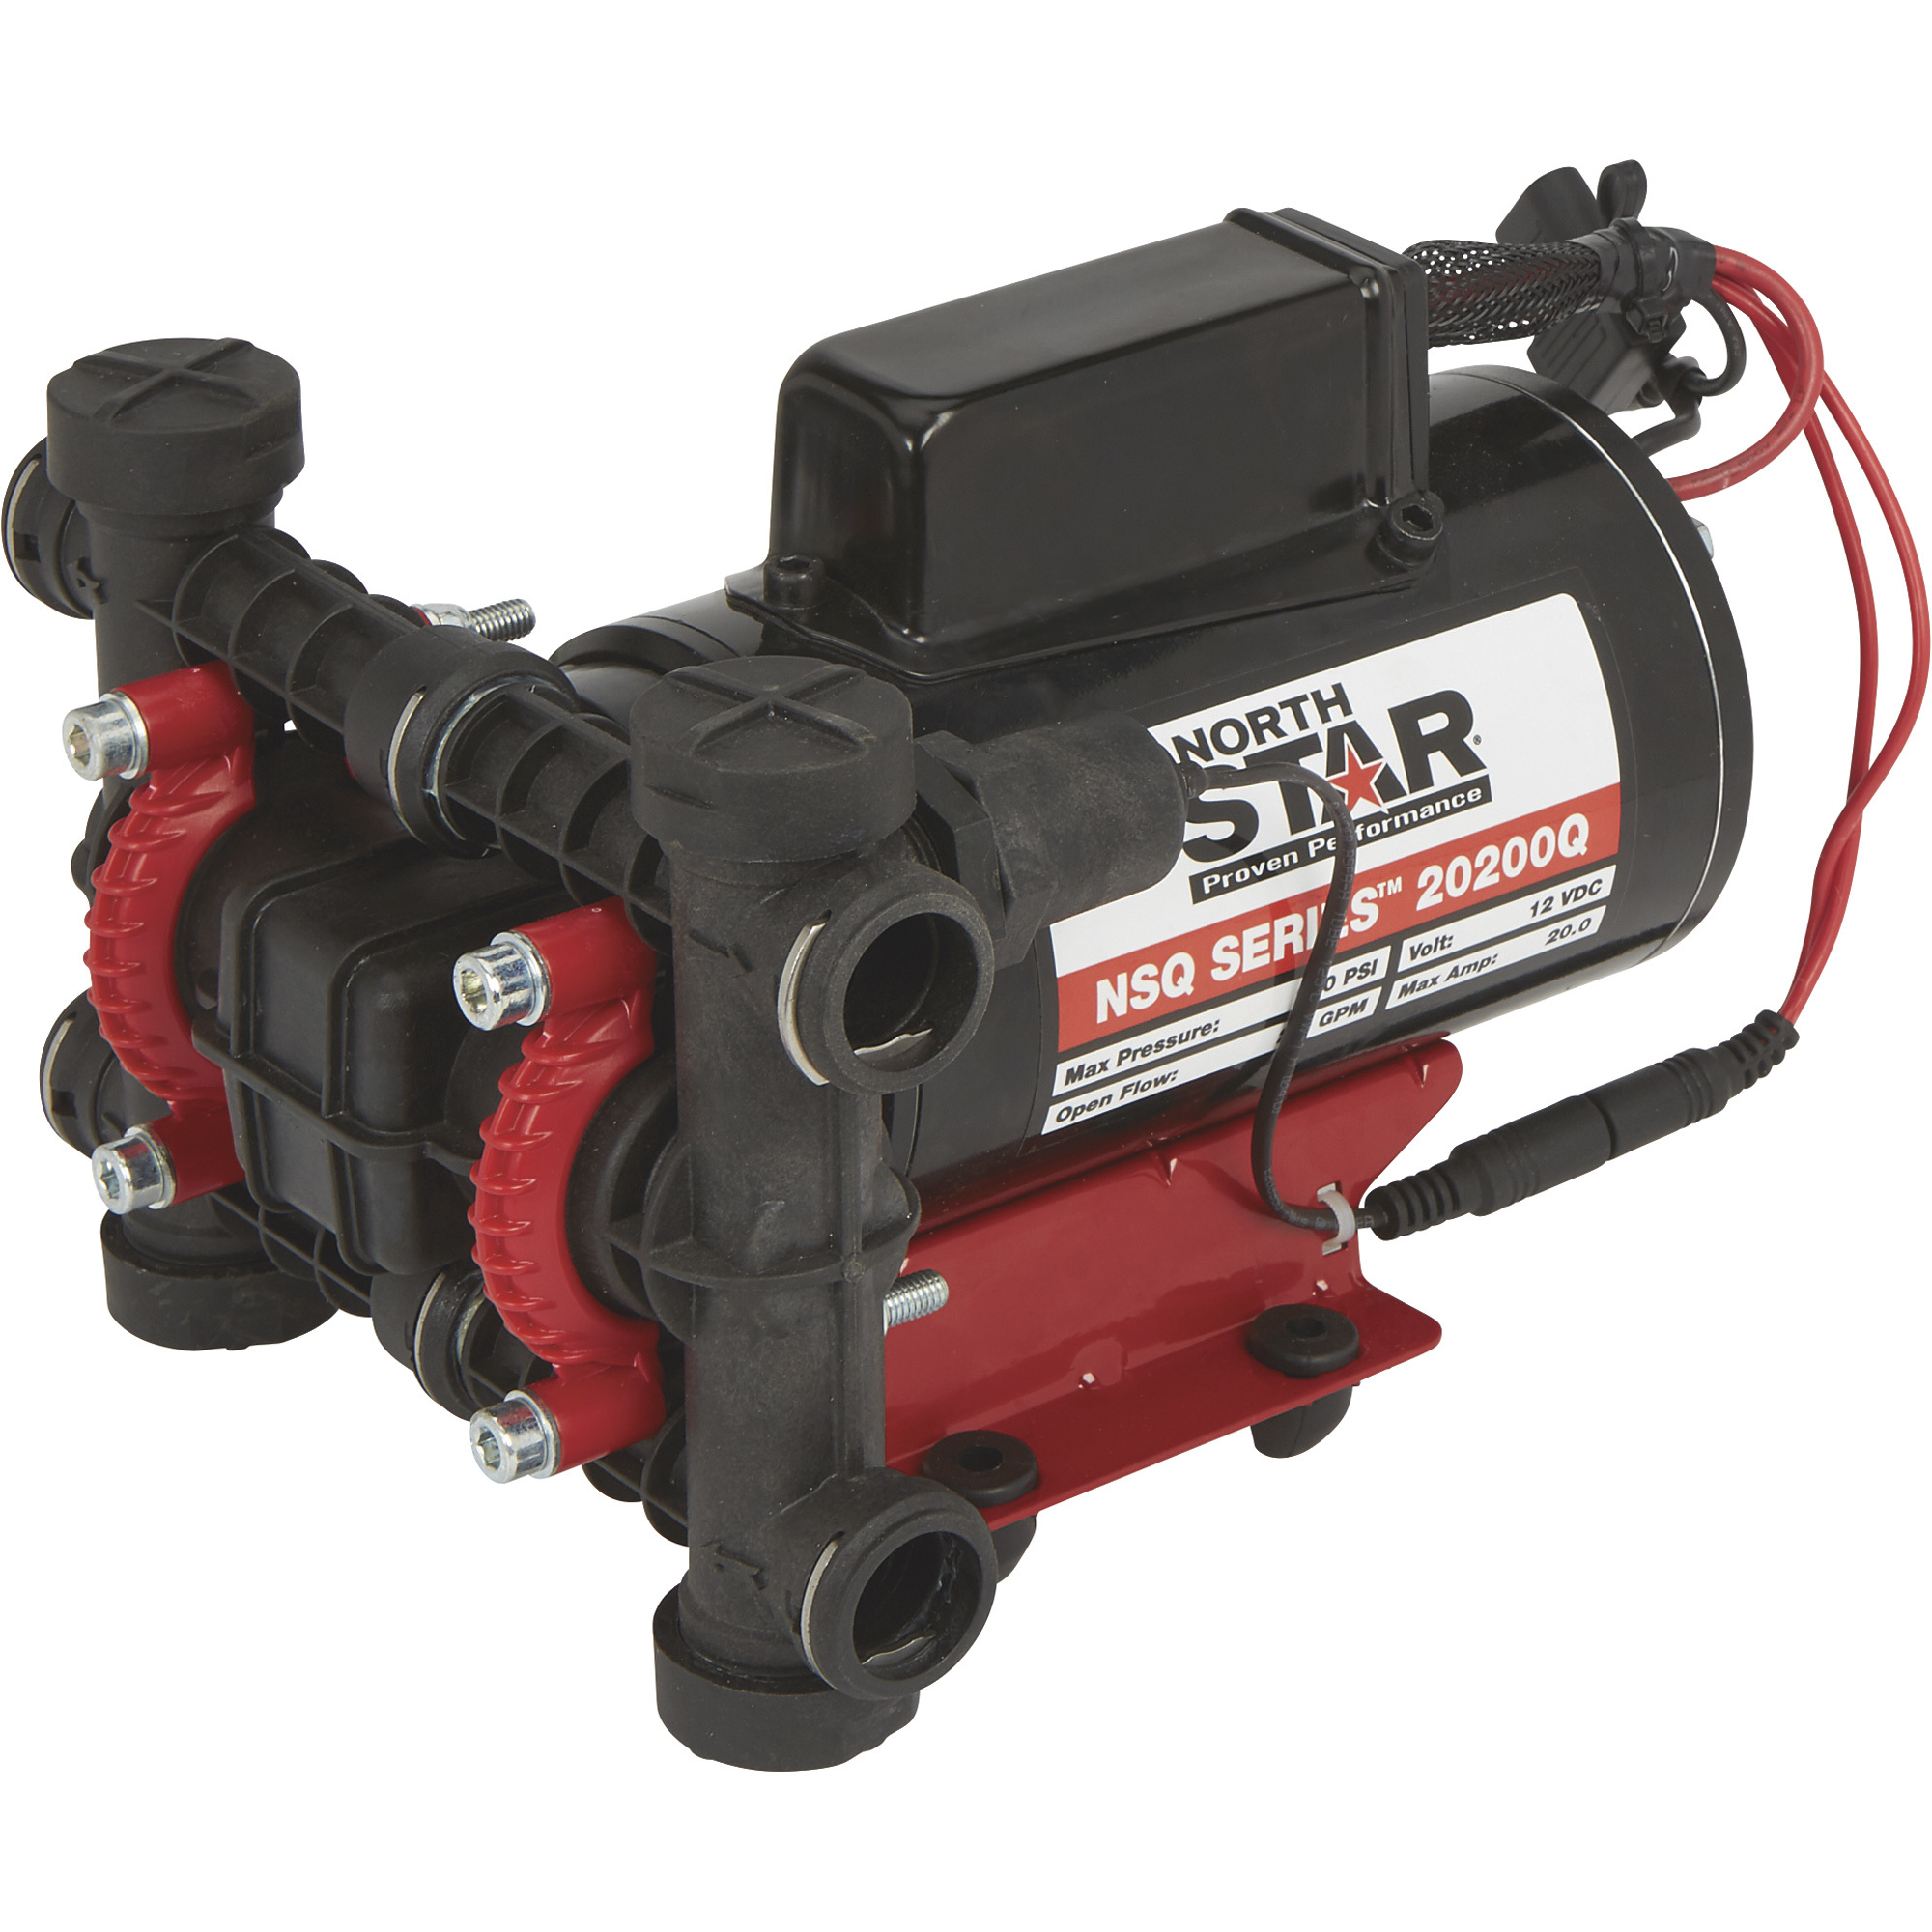 NorthStar NSQ Series On-Demand Plunger Sprayer Pump with Quick-Connect Ports â 2 GPM, 12 Volt, 200 PSI